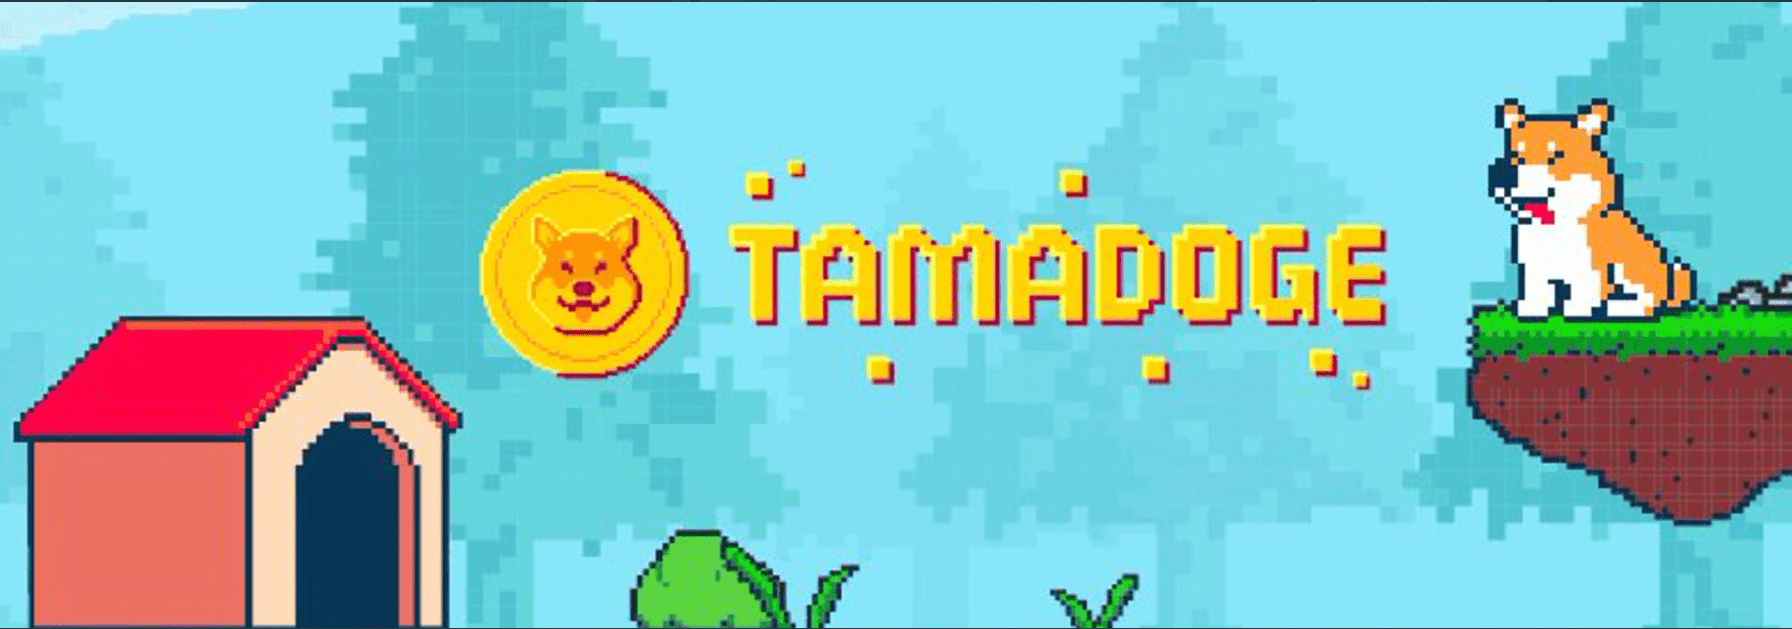 Tamadoge Promotion Launched With $1 Million Prizepool – InsideBitcoins.com